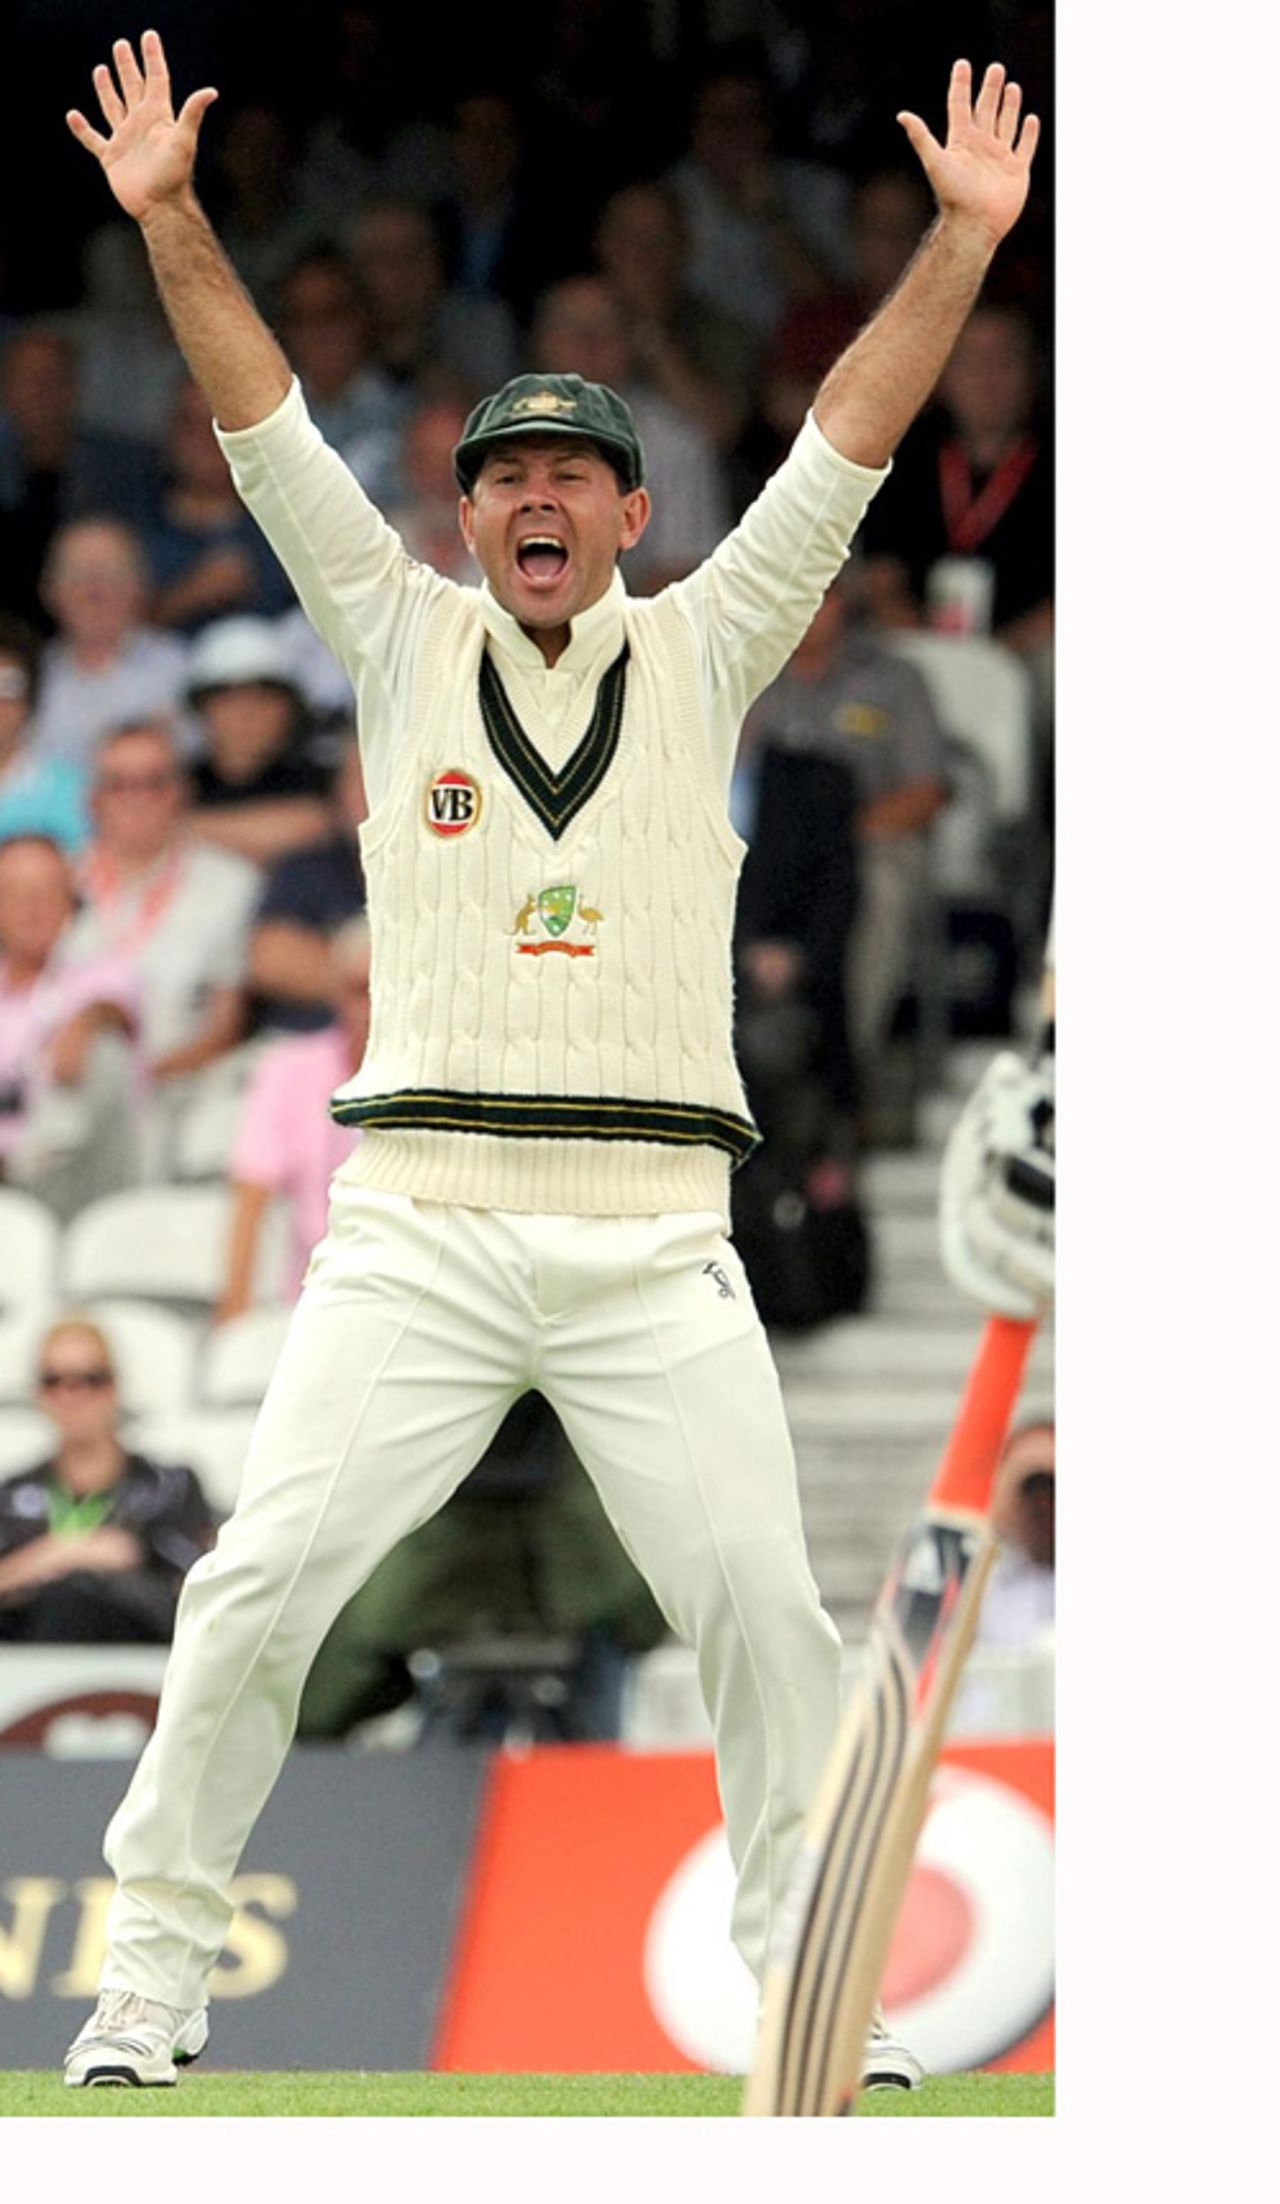 Ricky Ponting's appeal is rejected, England v Australia, 5th Test, The Oval, 1st day, August 20, 2009